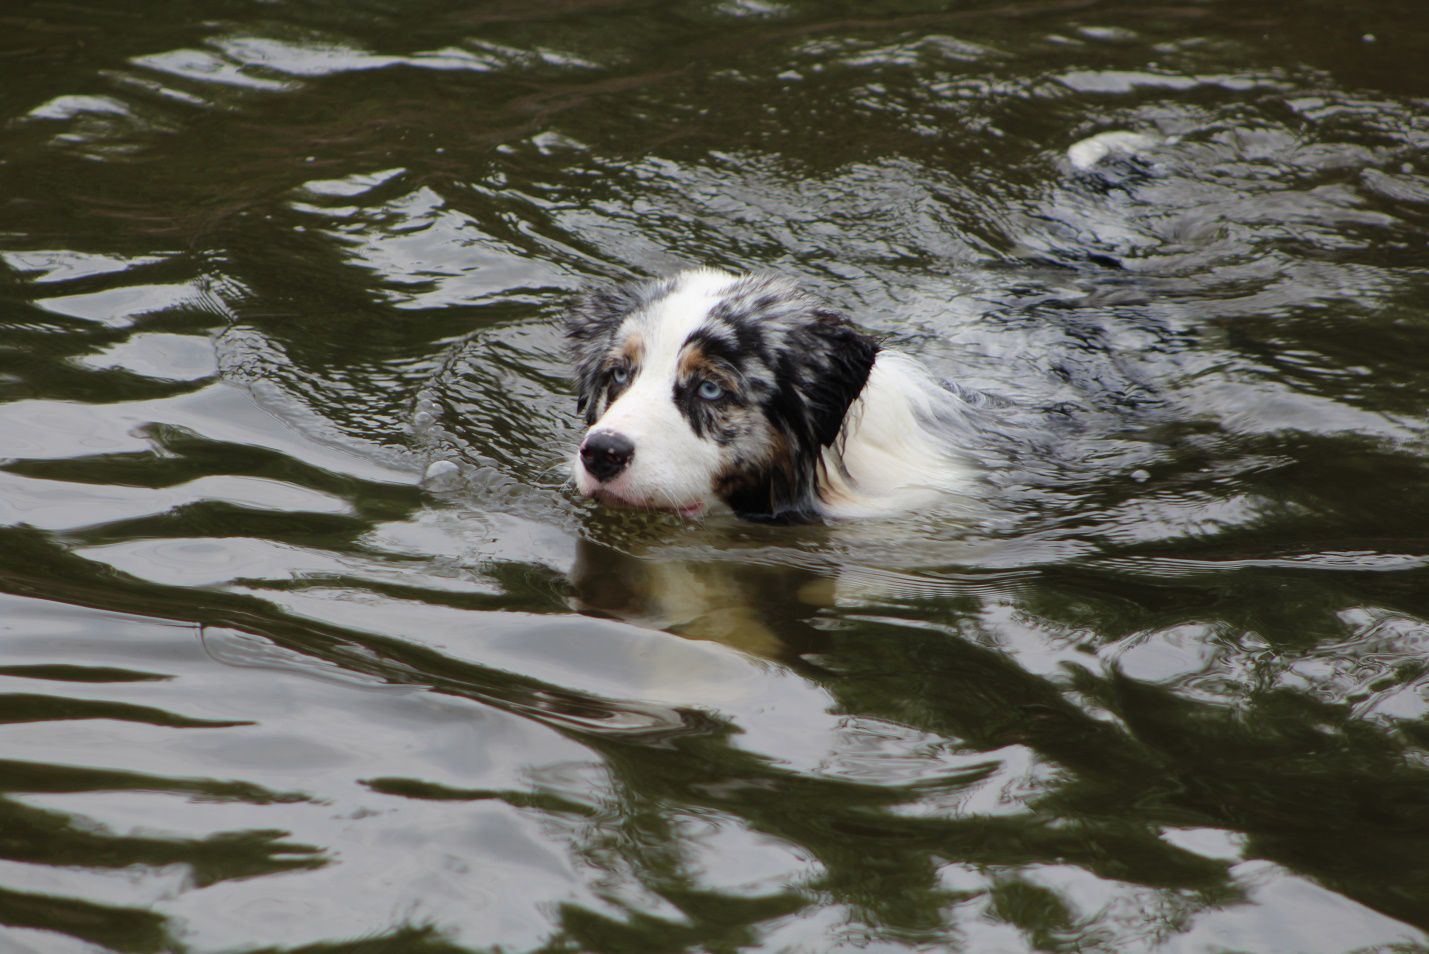 The Dog Breeds That Don’t Like Water